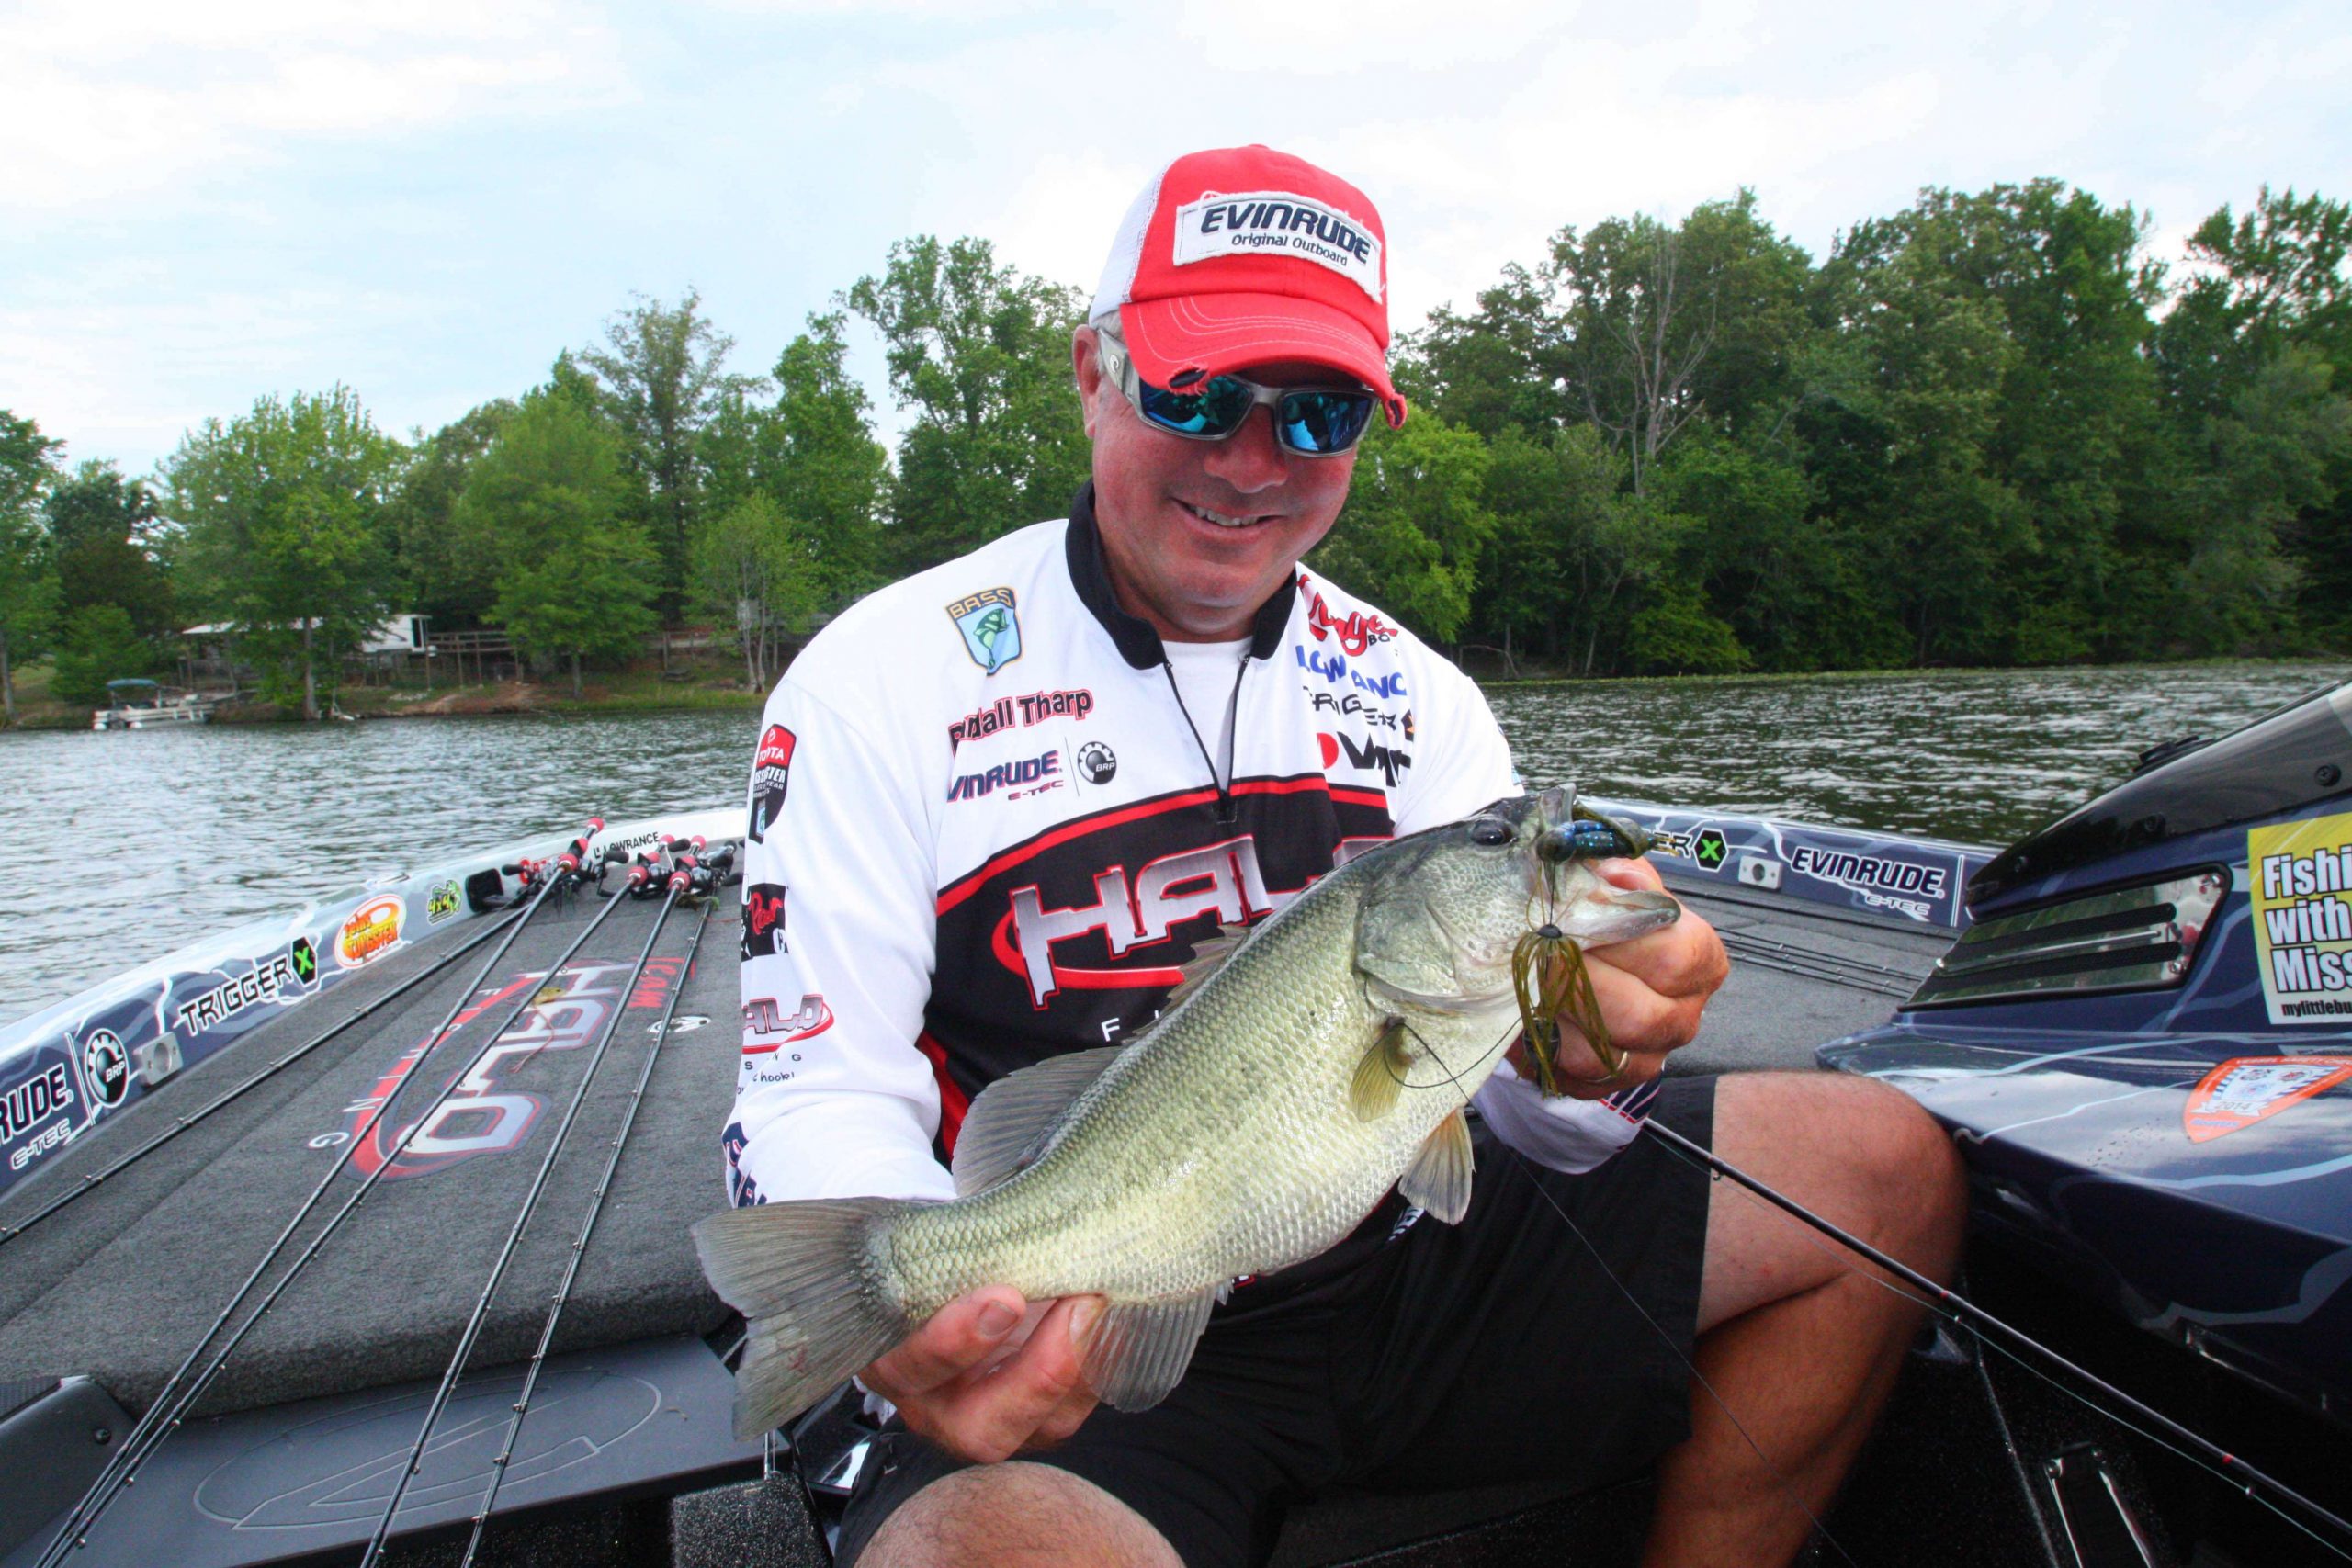 <b>9:25 a.m.</b> - Tharp bags his third keeper, 1-4, off a solitary pad on a Texas rigged craw.